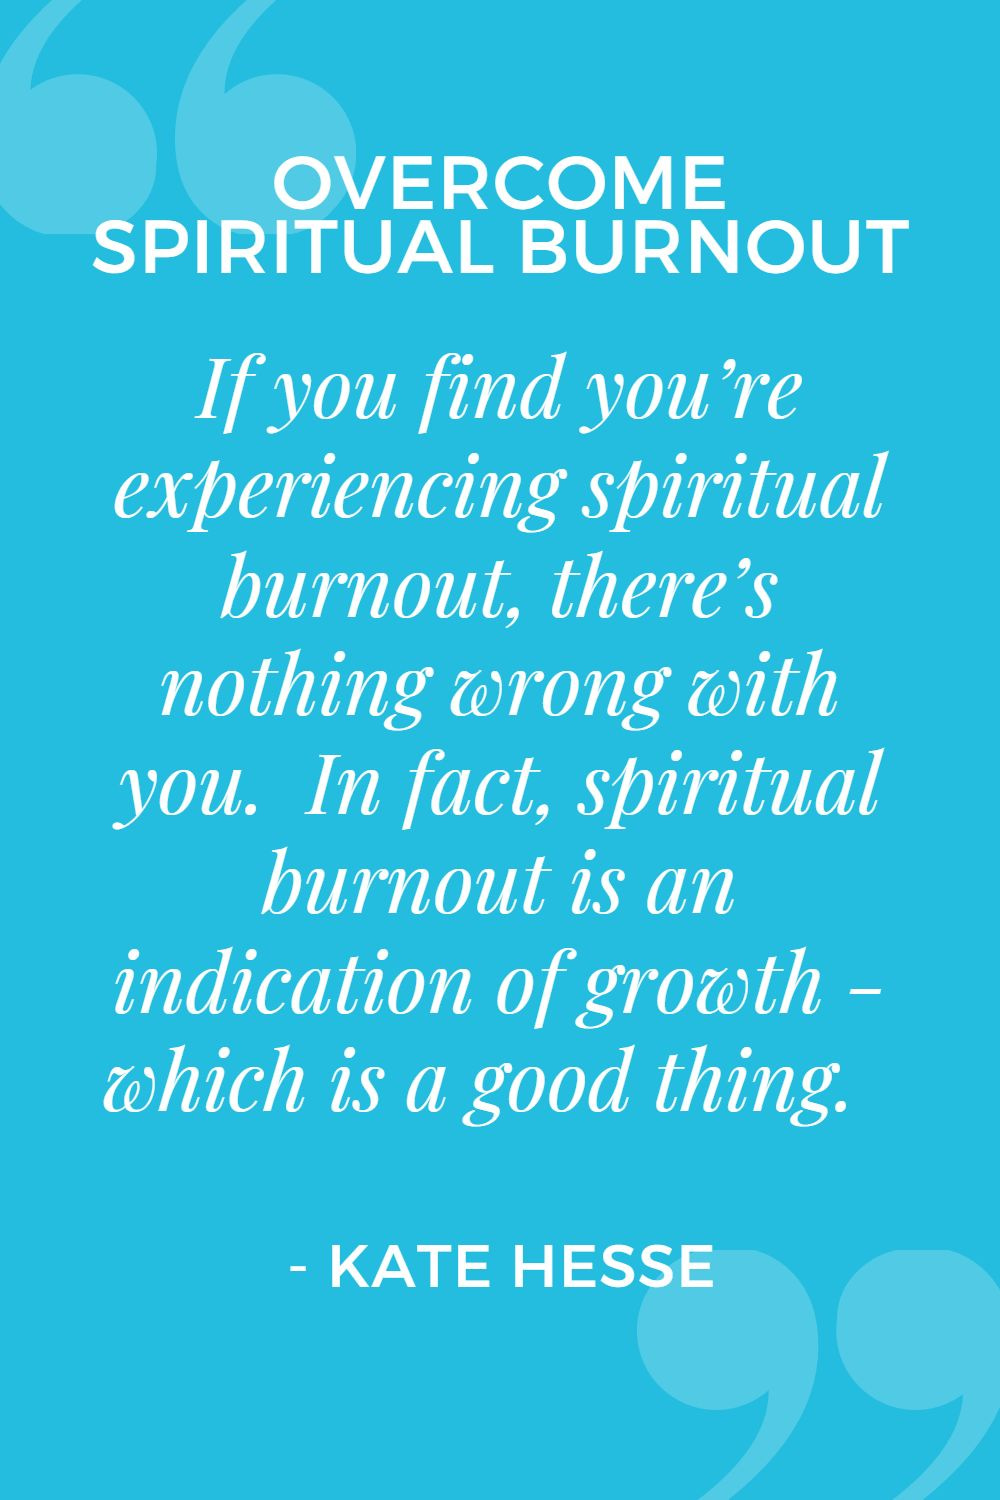 If you find you're experiencing spiritual burnout, there's nothing wrong with you. In fact, spiritual burnout is an indication of growth - which is a good thing!